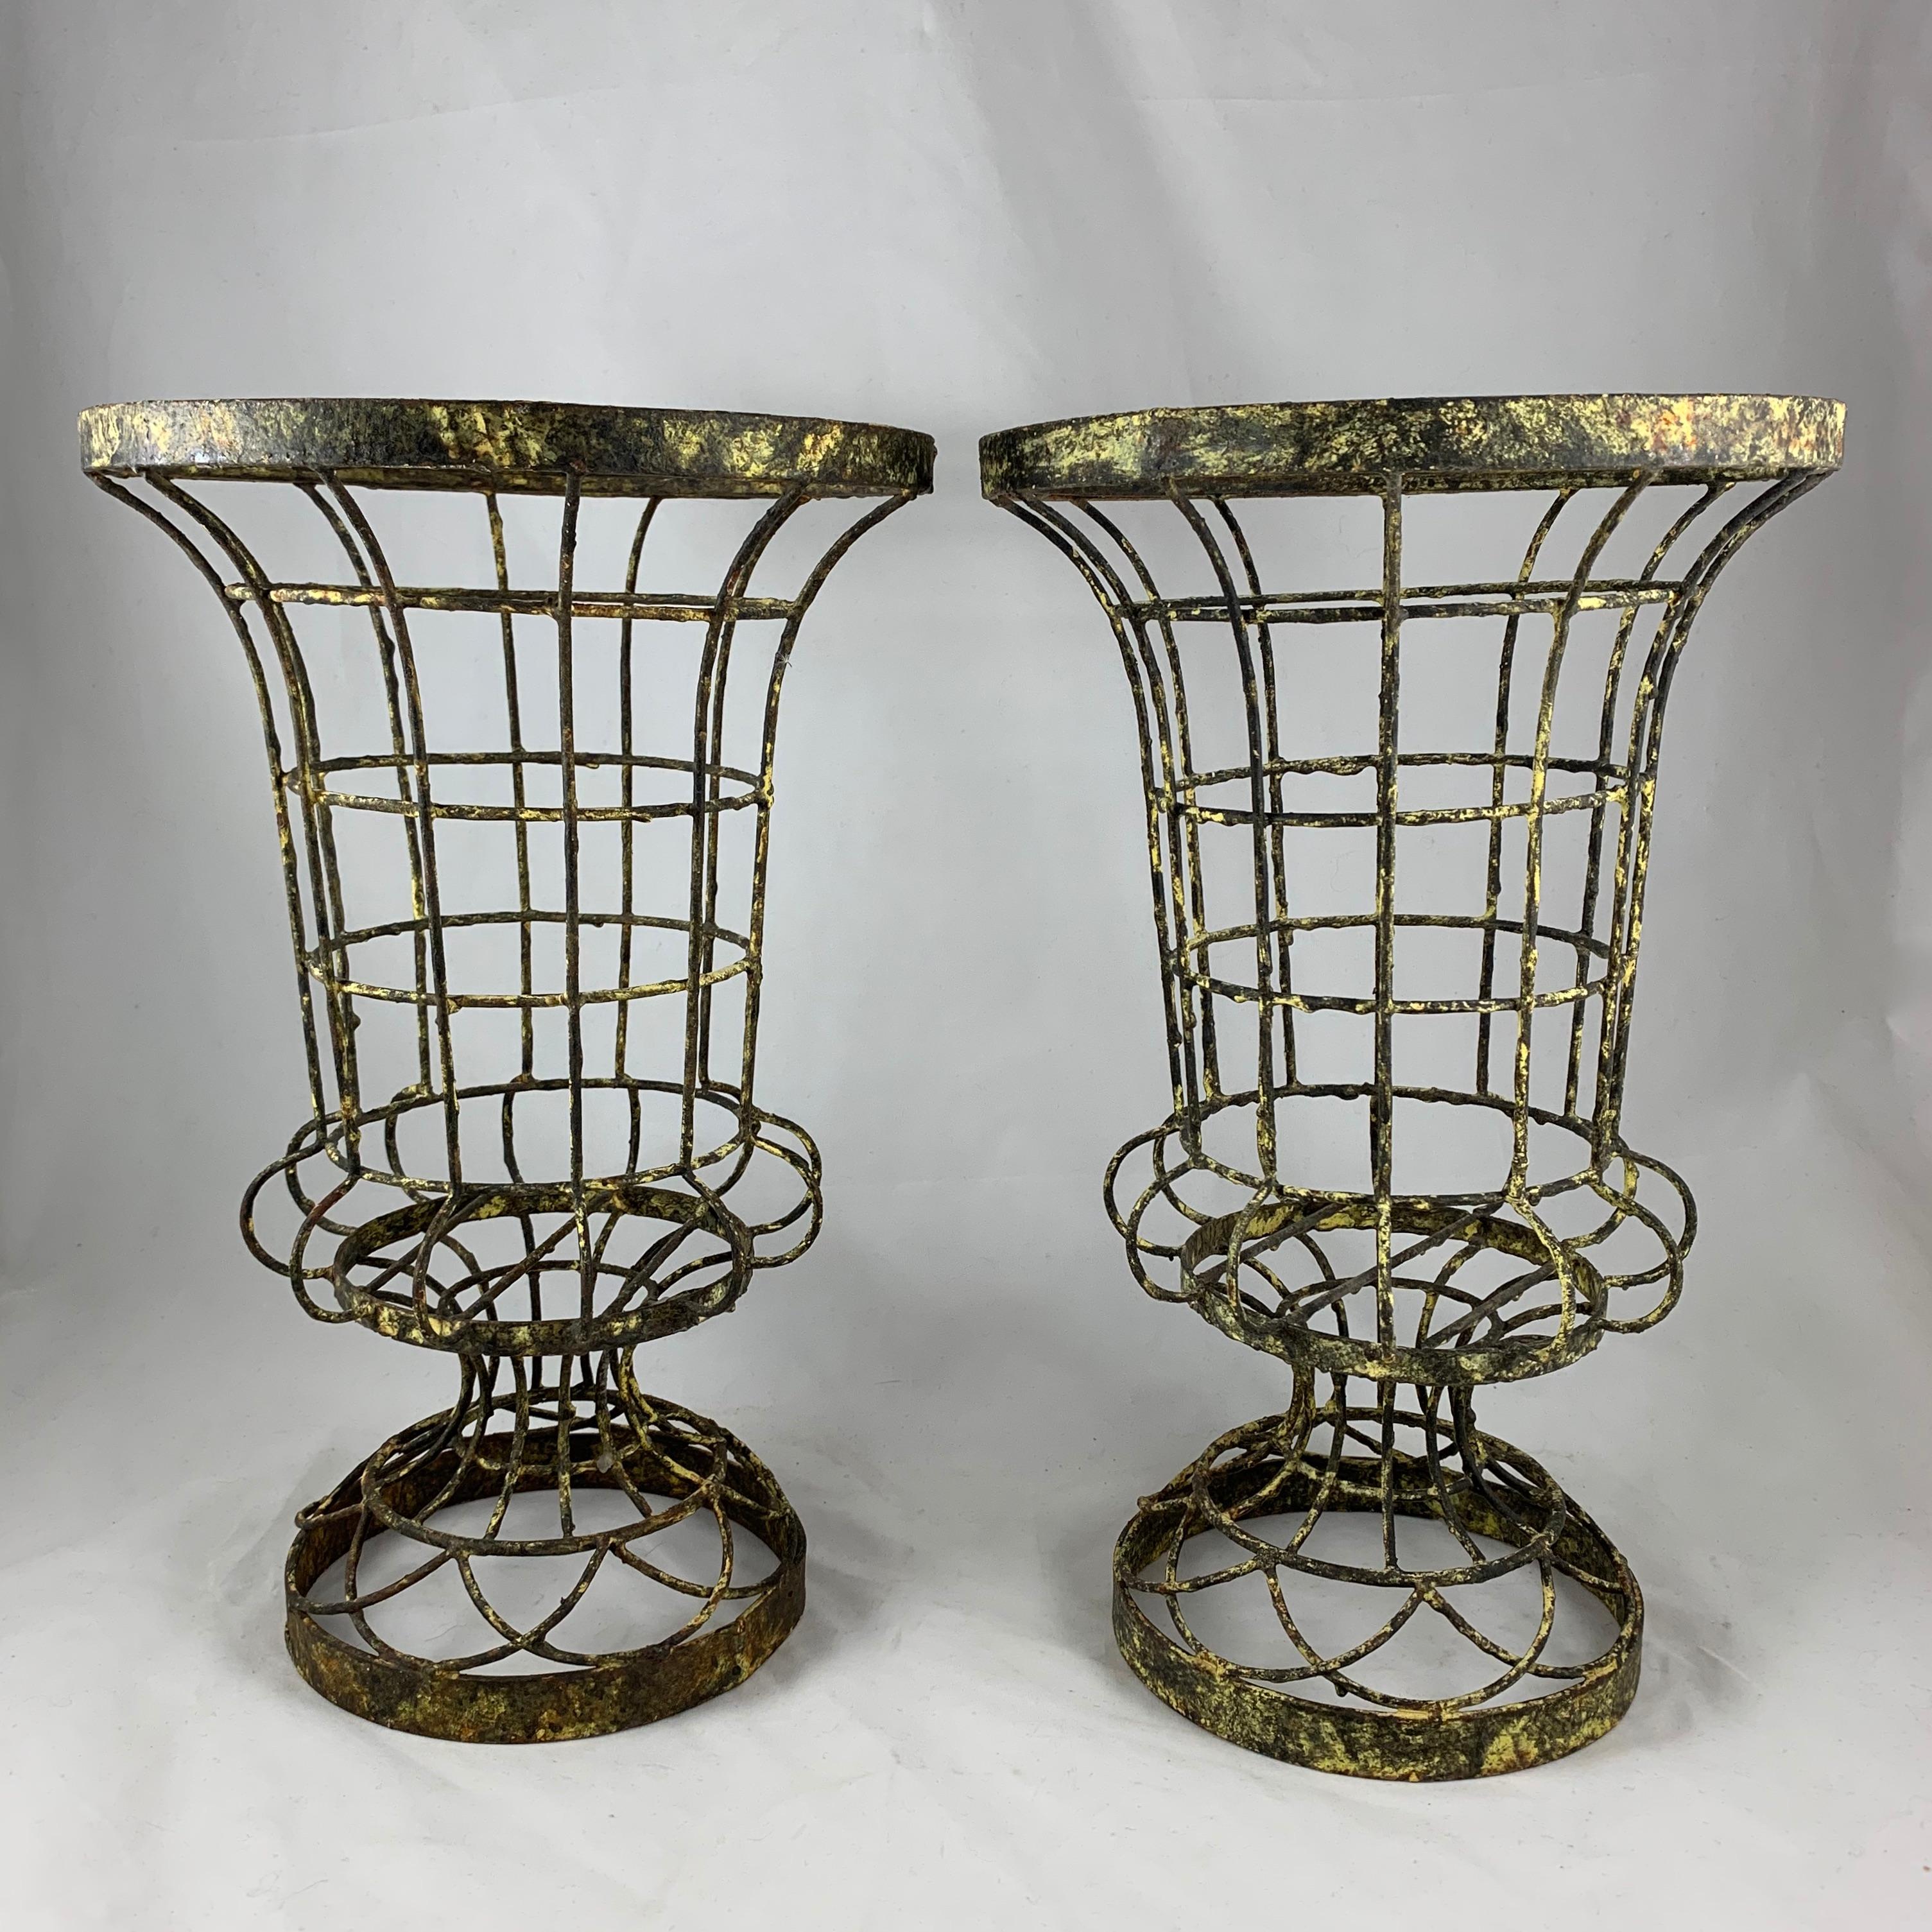 French Provincial French Painted Iron Jardinière Garden Topiary Planters w/ Trellis Tops 4 Pc. Set